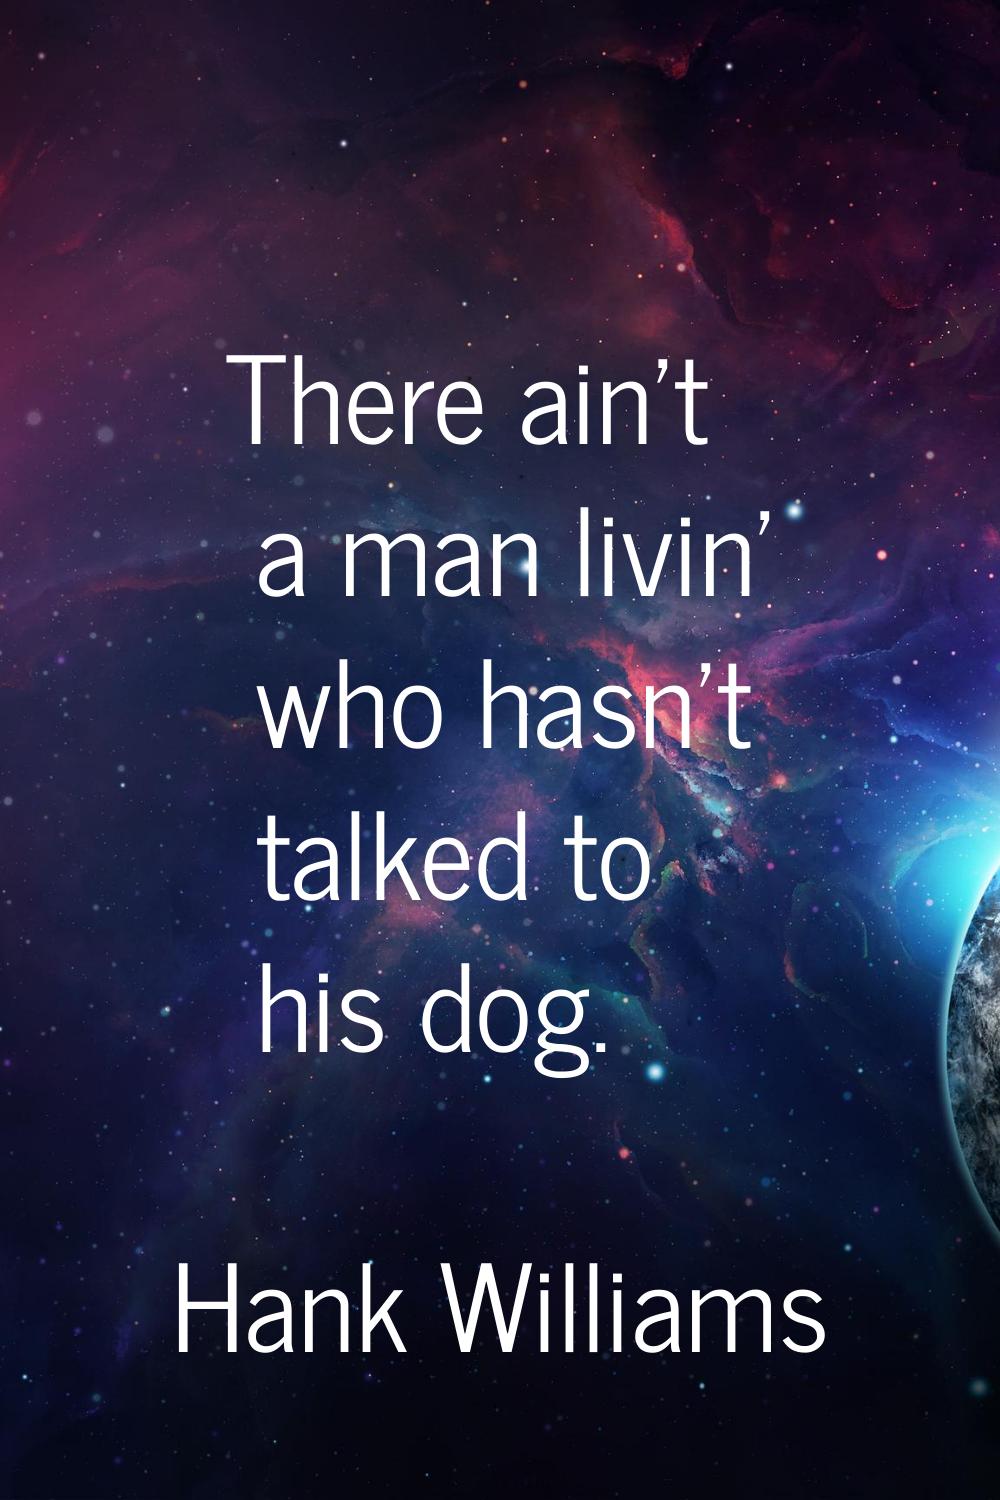 There ain't a man livin' who hasn't talked to his dog.